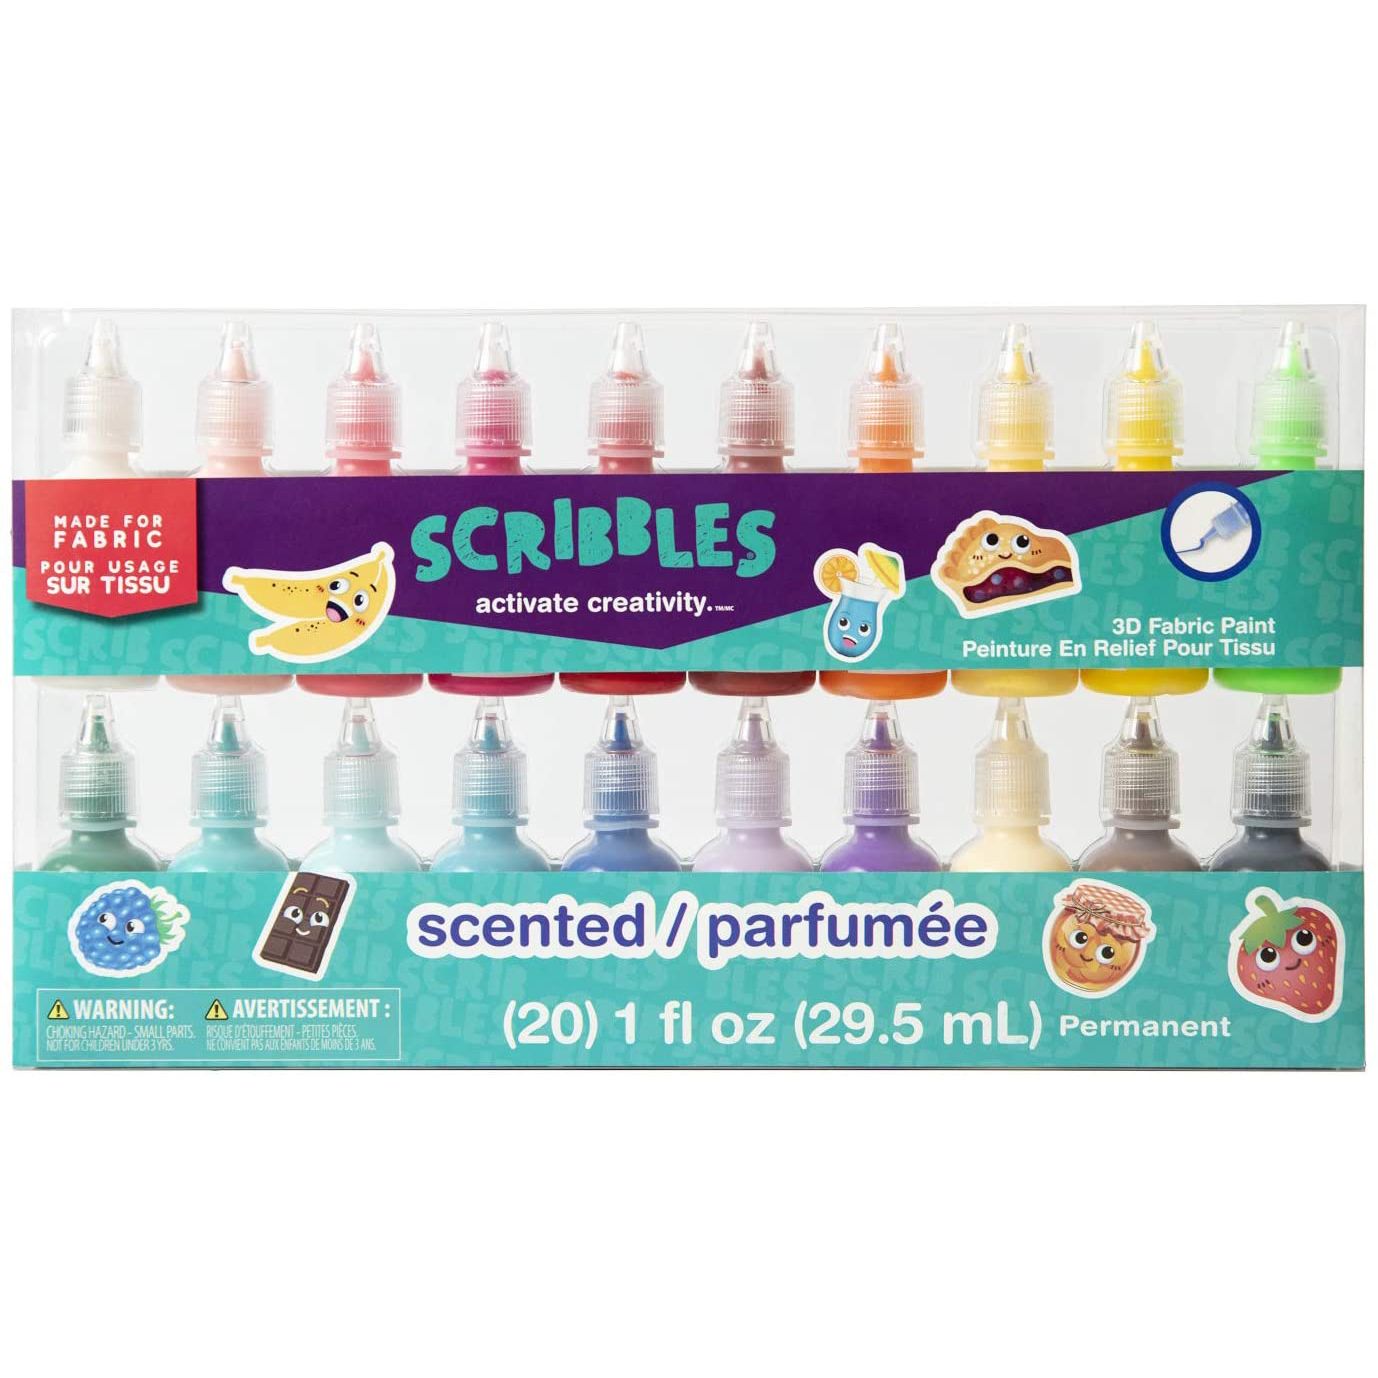 Scribbles • 3D Fabric Paint Shiny 29.5ml Multi Scented 20bottles